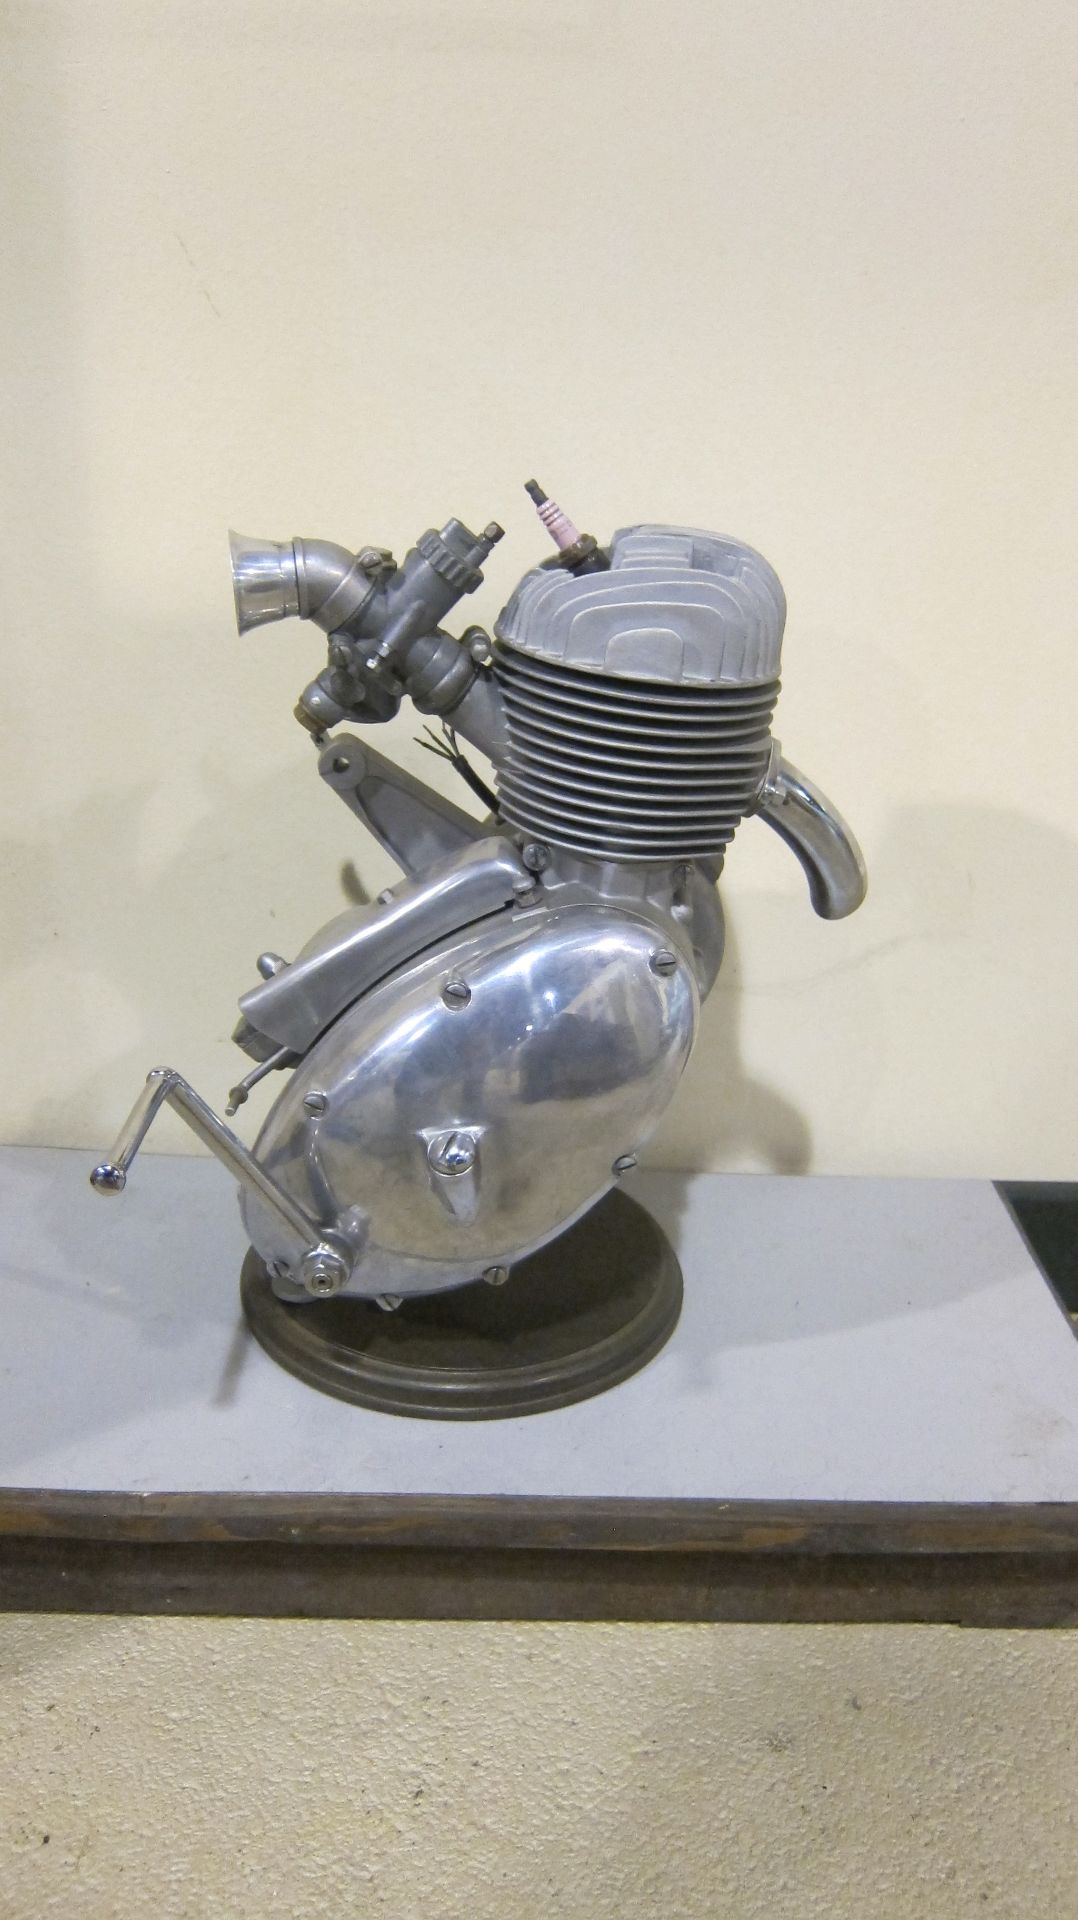 An unidenitied Two-stroke engine